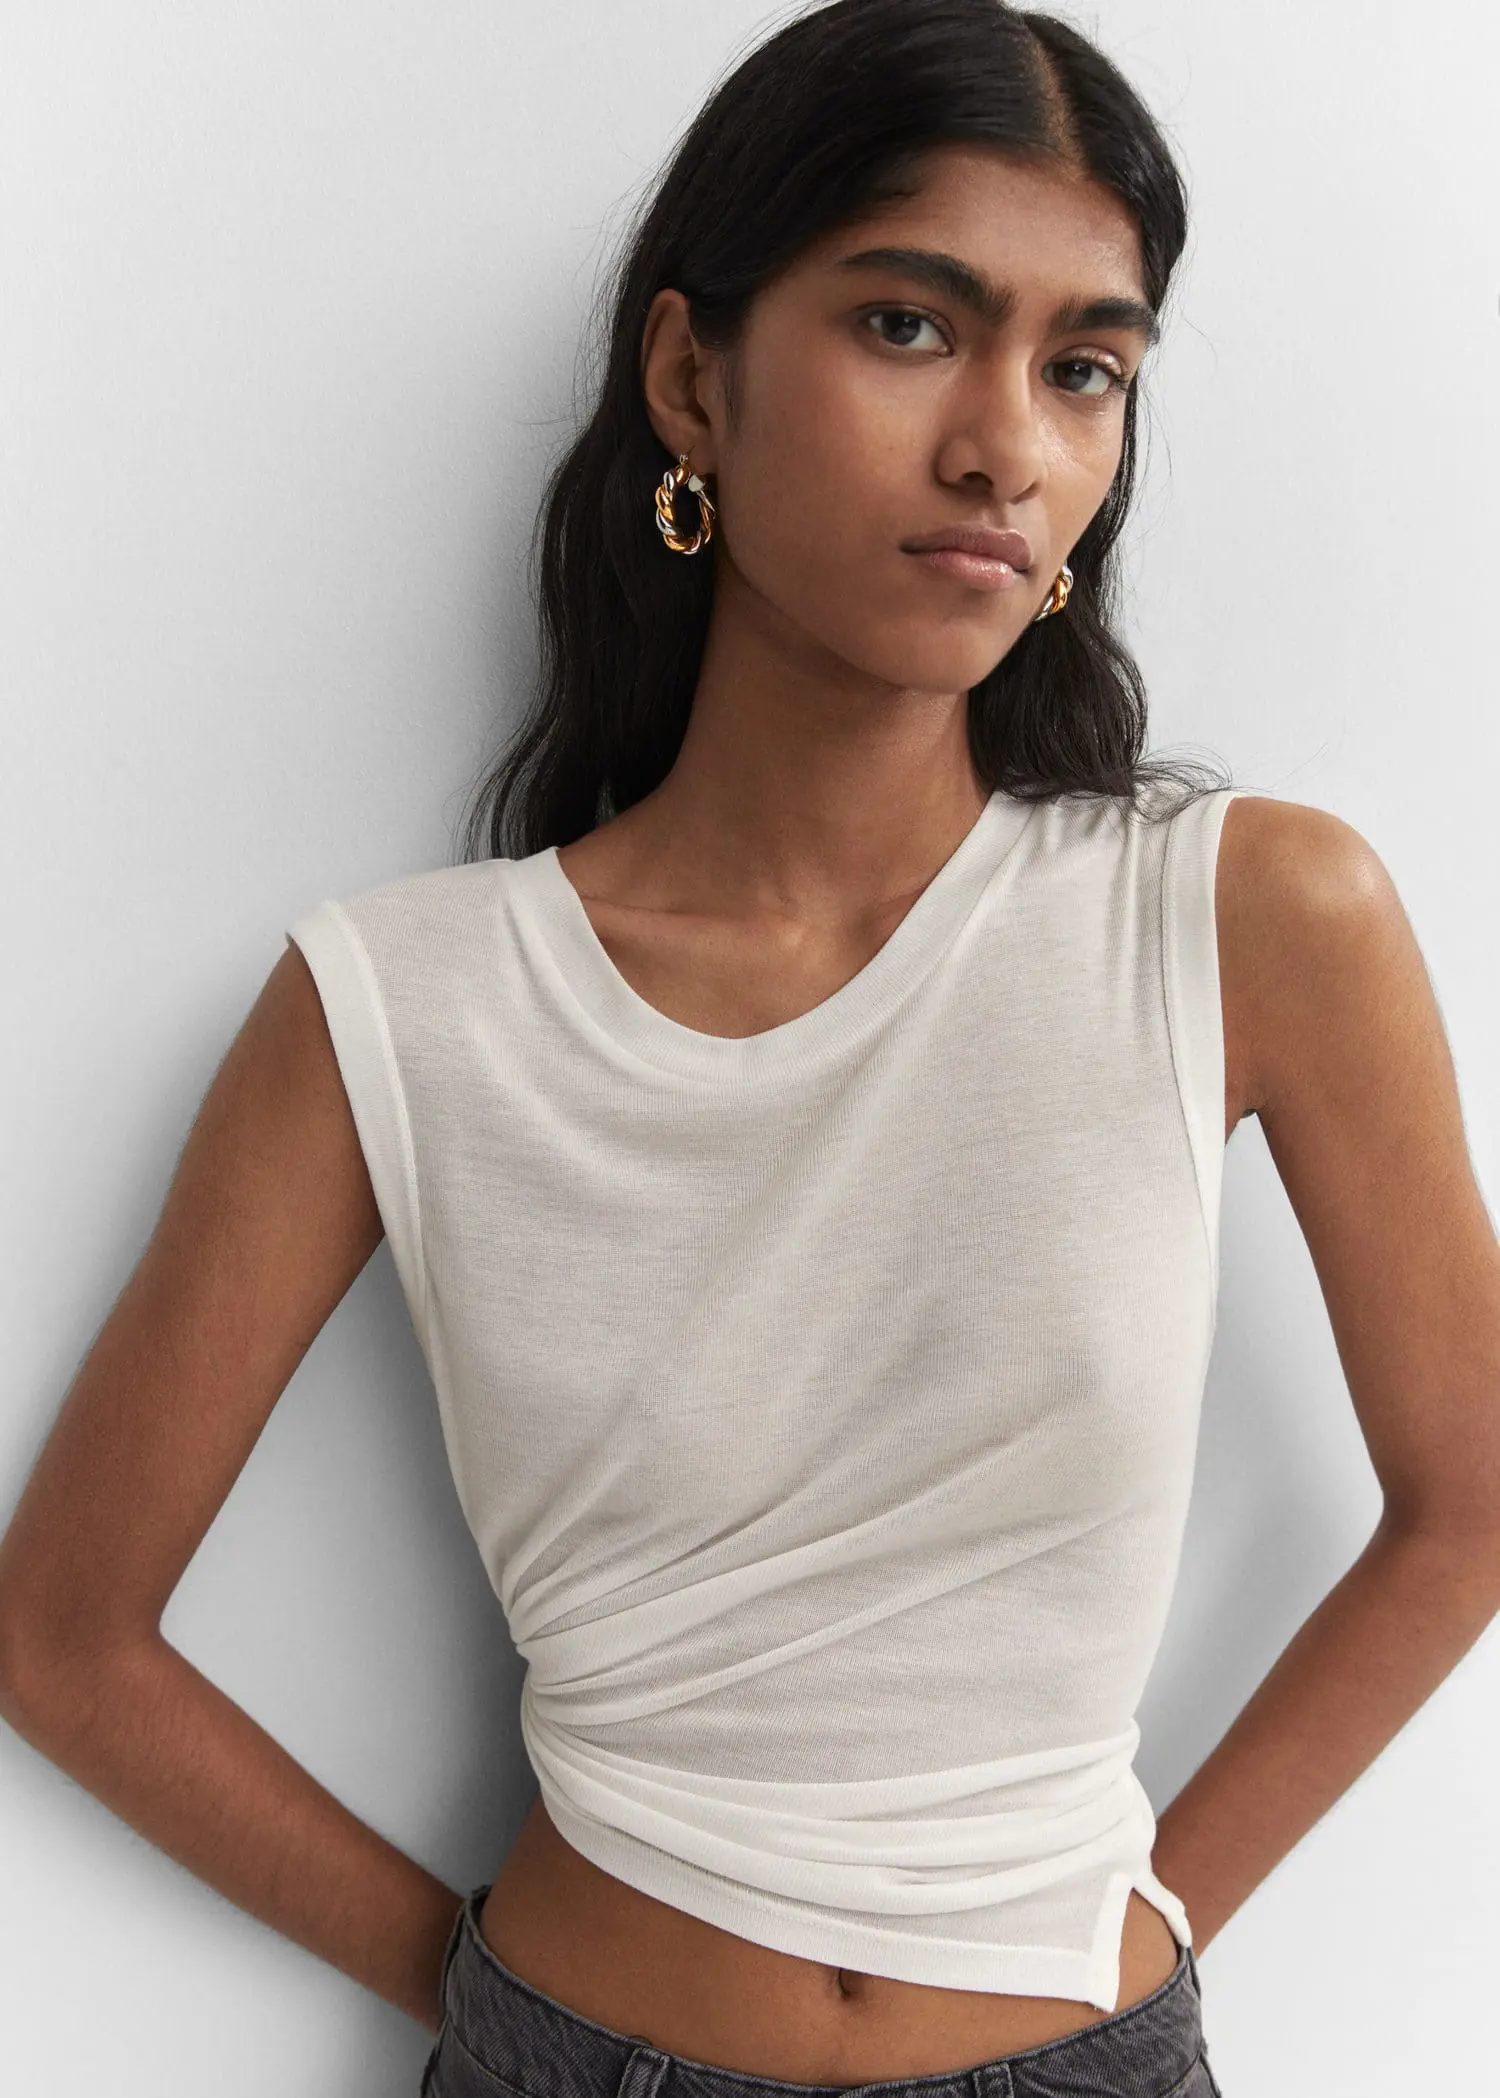 Mango Intertwined hoop earrings. a woman in a white shirt and a white wall 